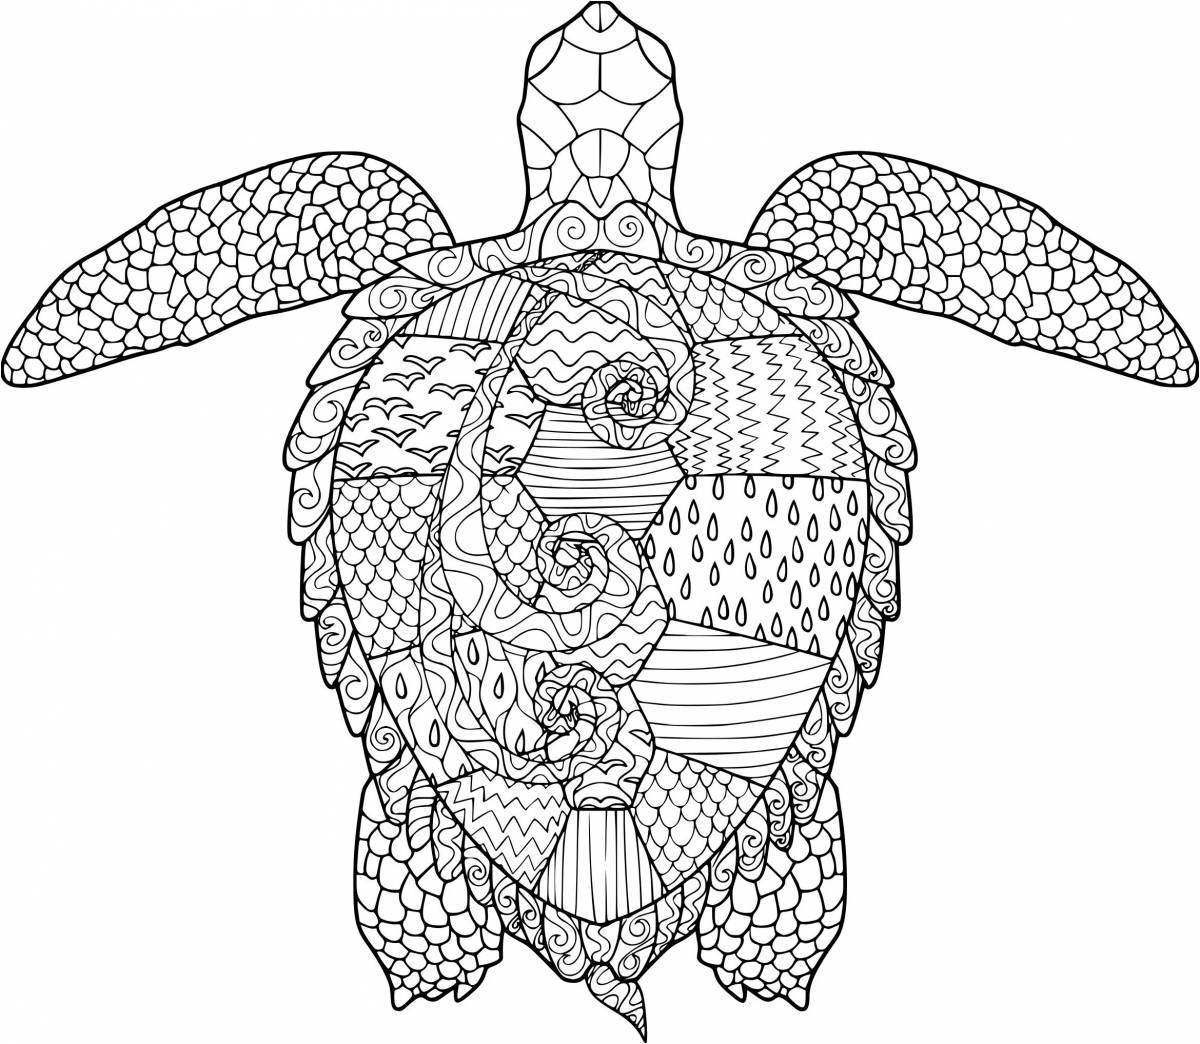 Coloring book gorgeous anti-stress turtle